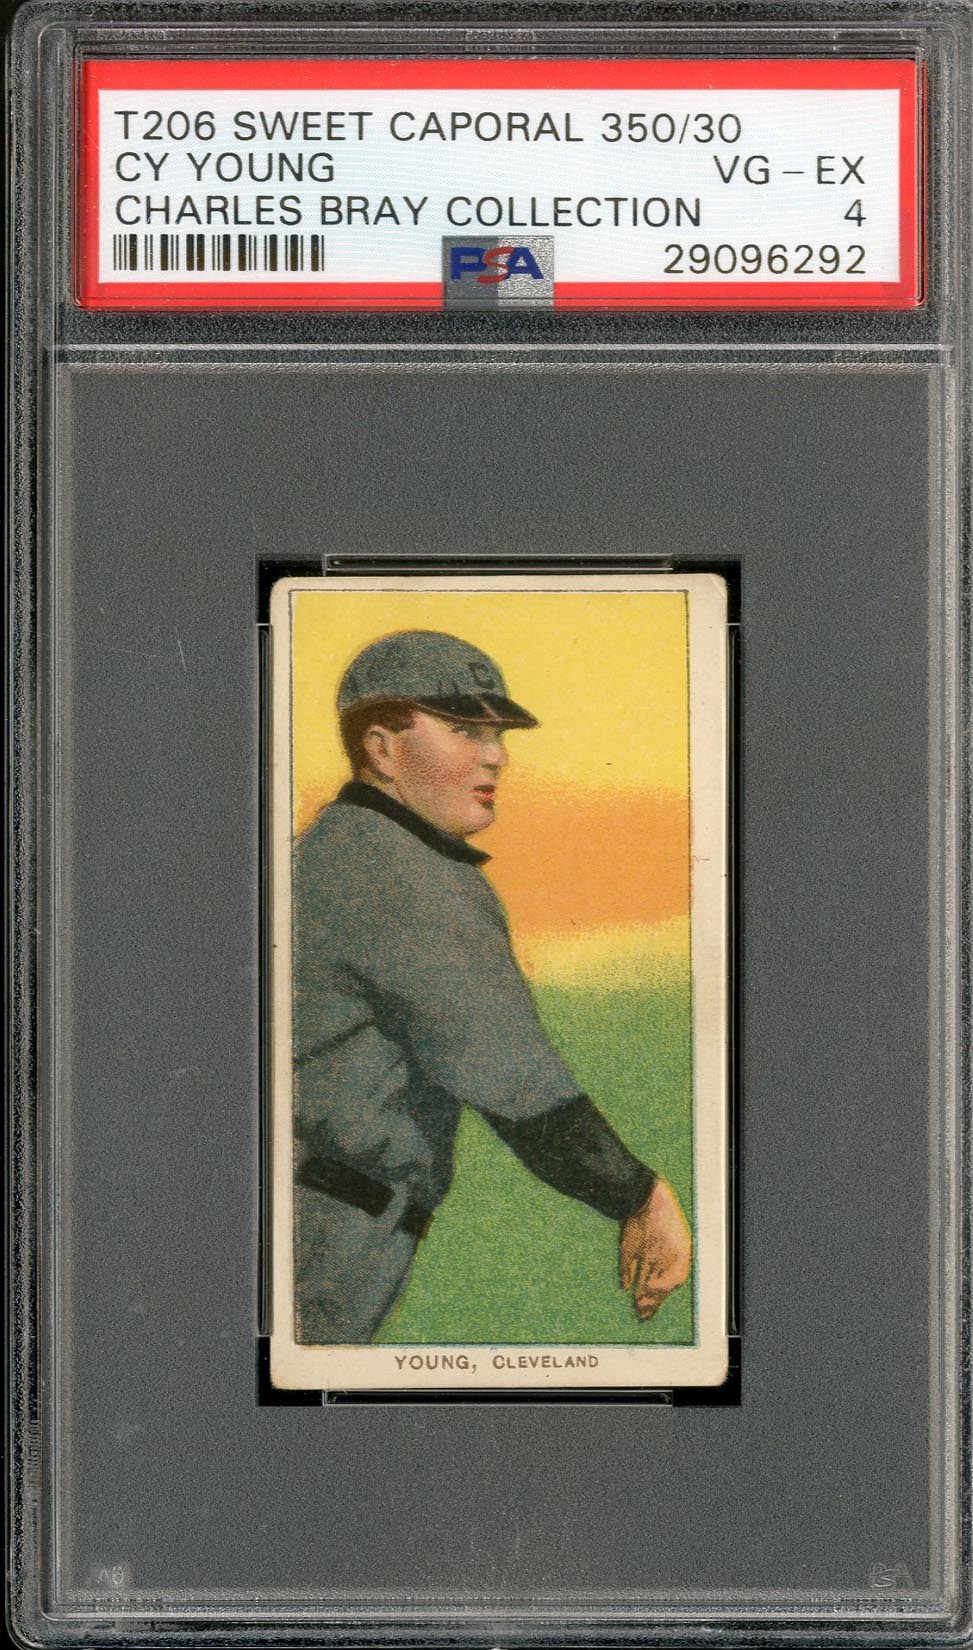 Baseball and Trading Cards - T206 Cy Young Bare Hand Shows PSA VG-EX 4 - The Charles Bray Collection